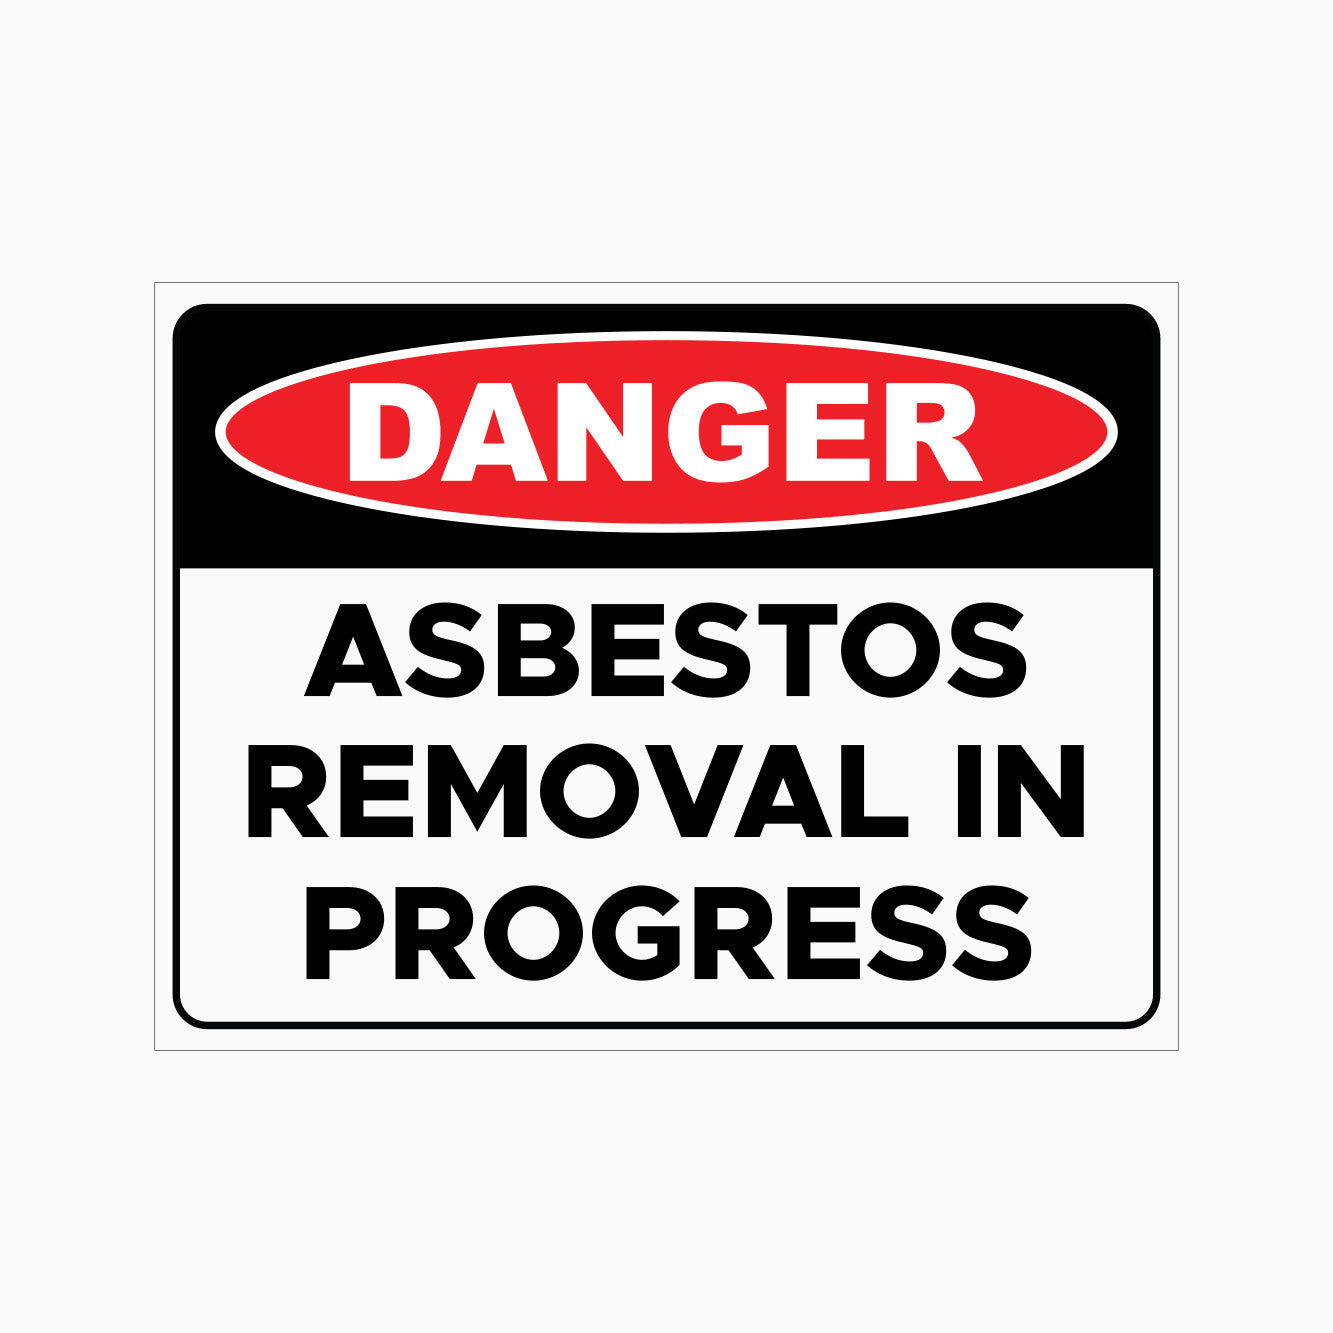 ASBESTOS REMOVAL IN PROGRESS SIGN - GET SIGNS